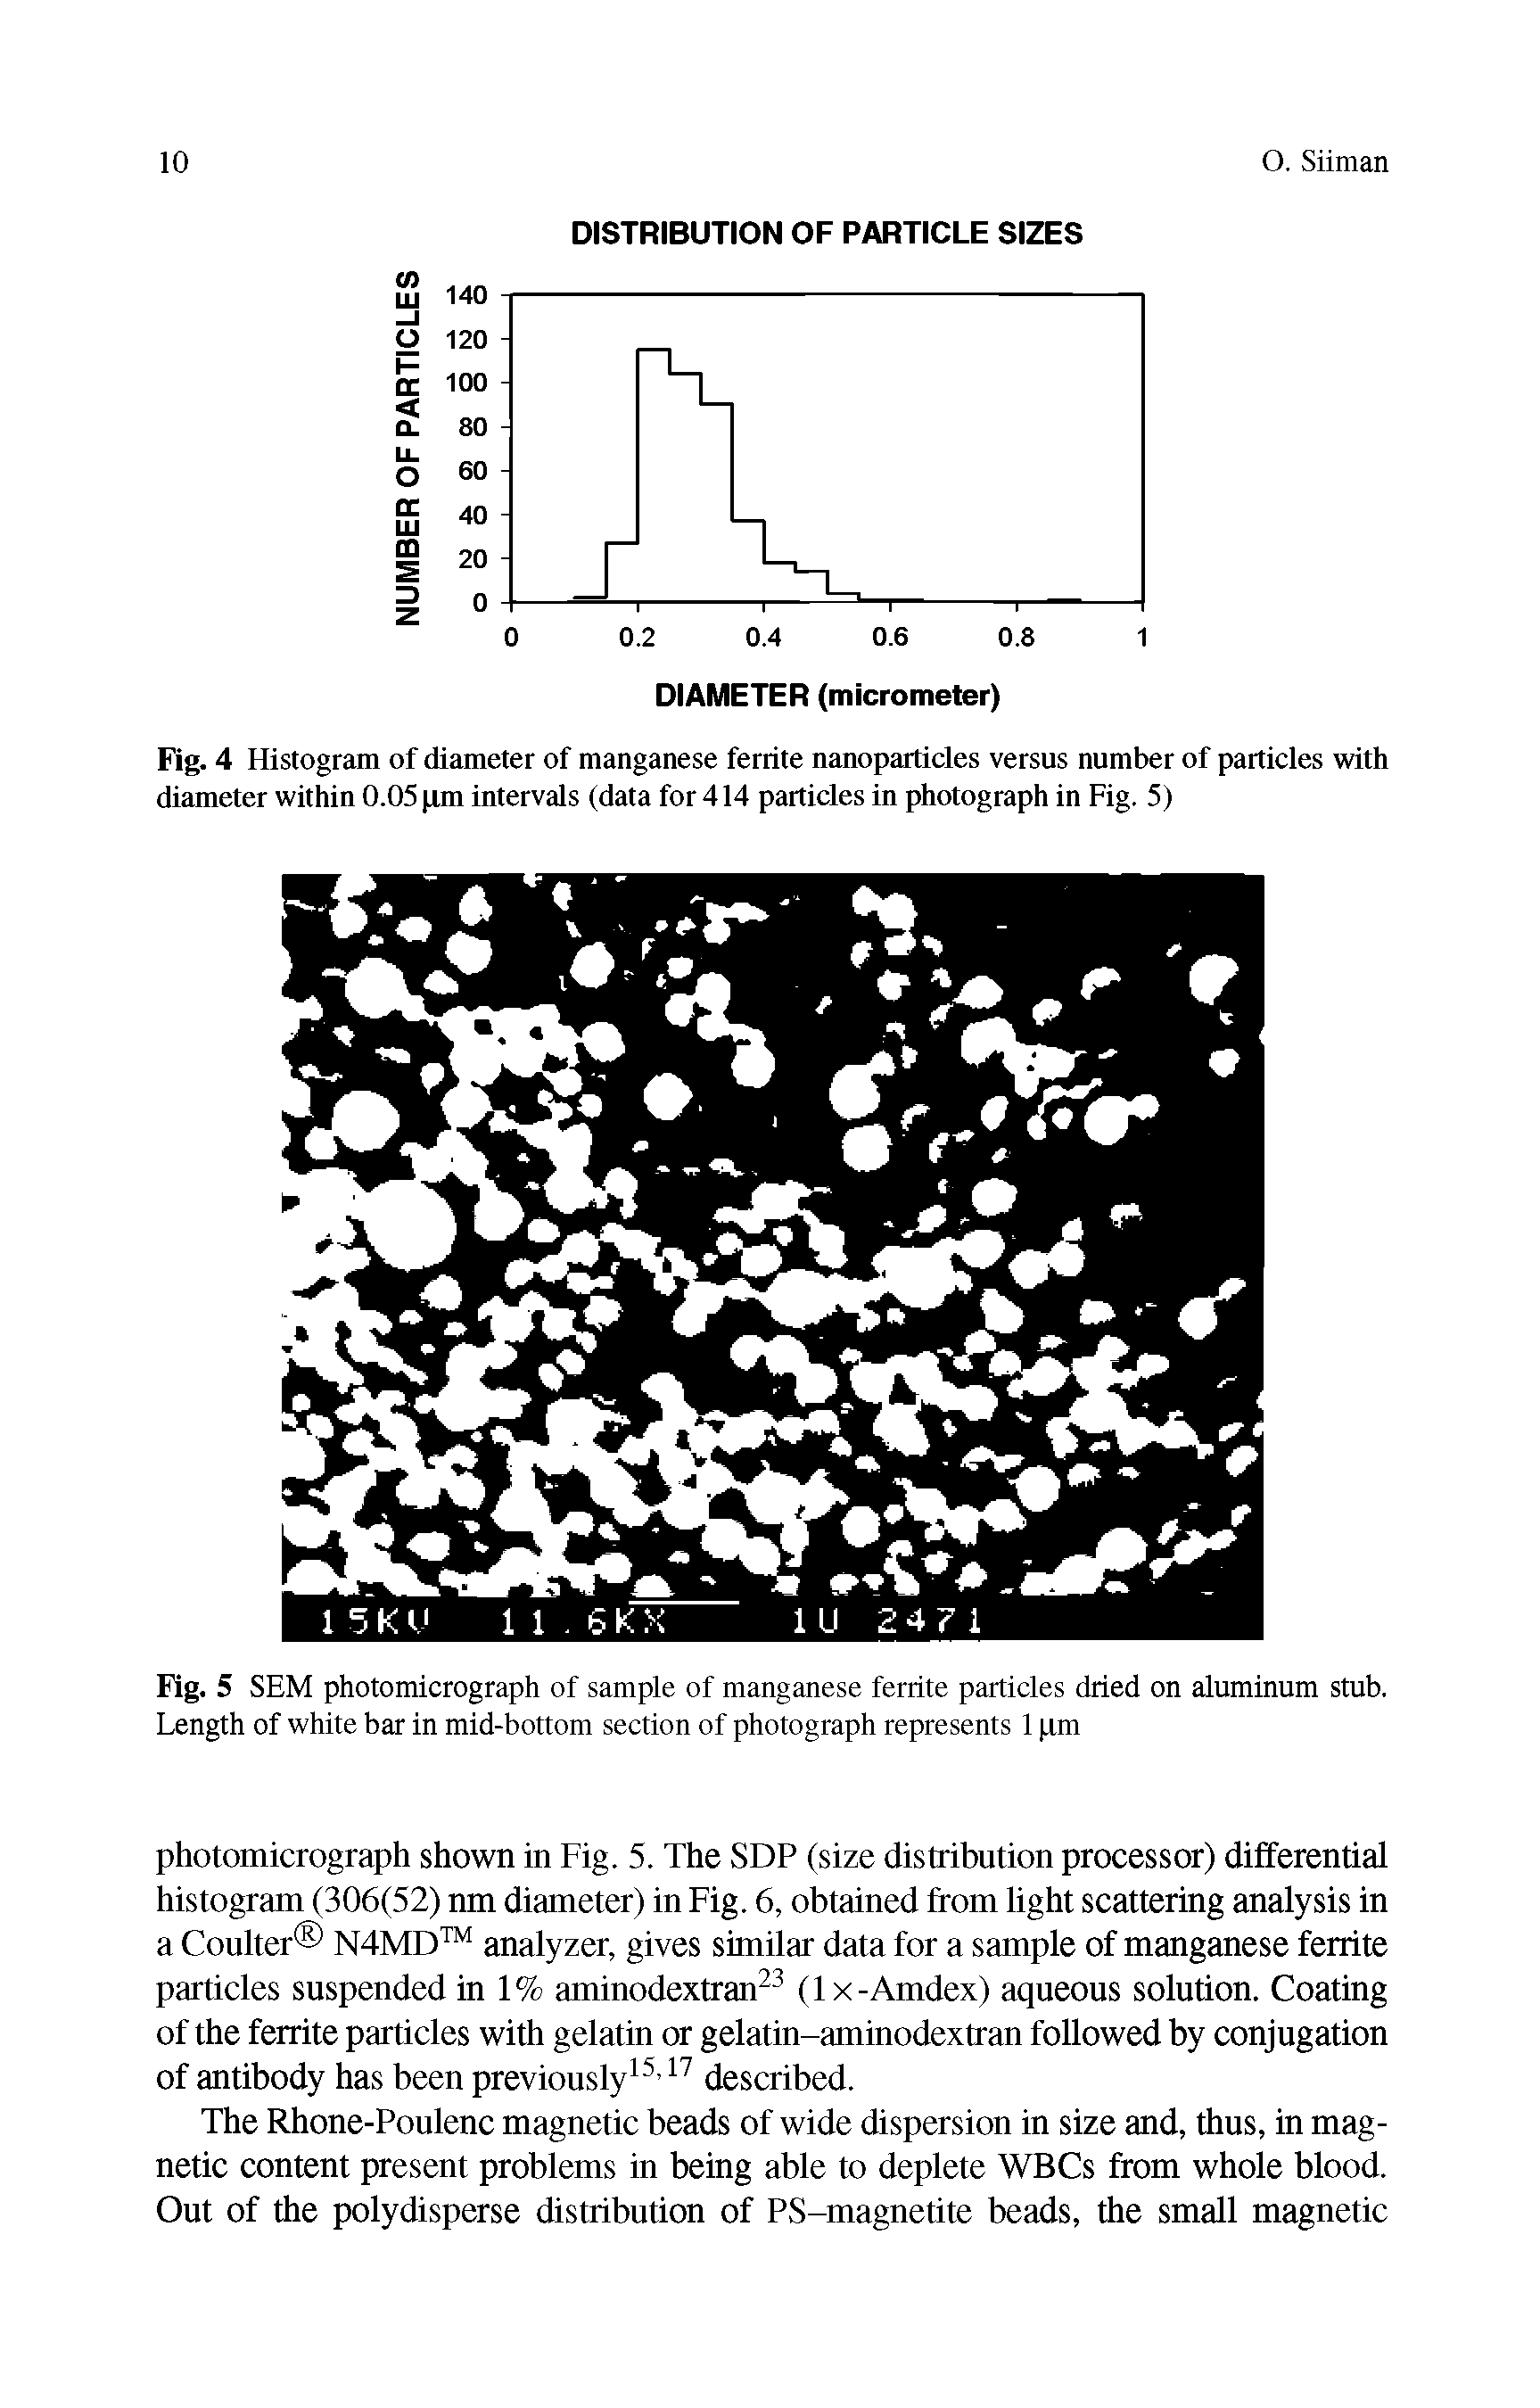 Fig. 5 SEM photomicrograph of sample of manganese ferrite particles dried on aluminum stub. Length of white bar in mid-bottom section of photograph represents 1 pm...